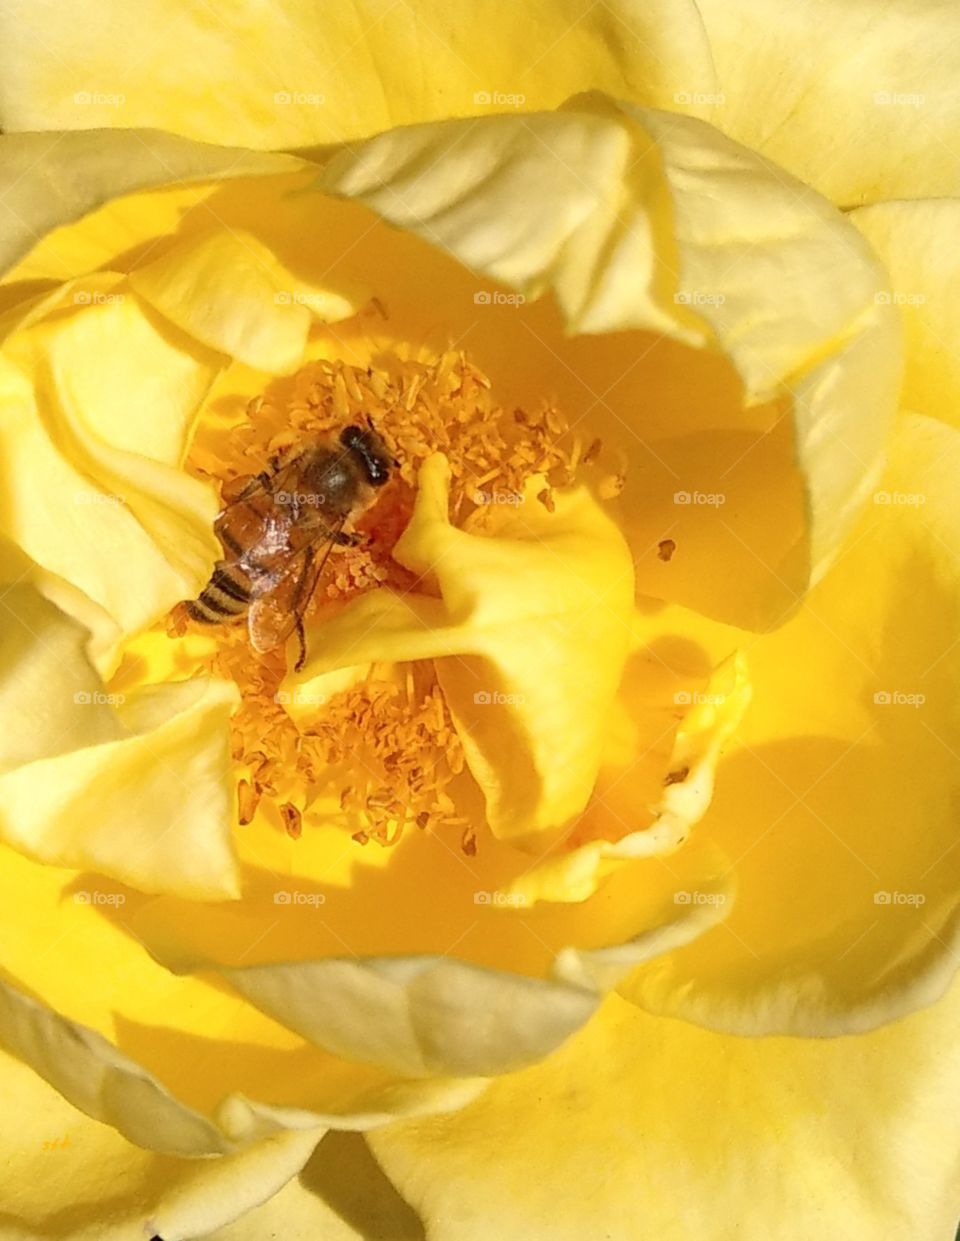 The closeup of a yellow rose. a bee parked on the flower. the nectar of love is like this rose, so sweet and bright, also beautiful.